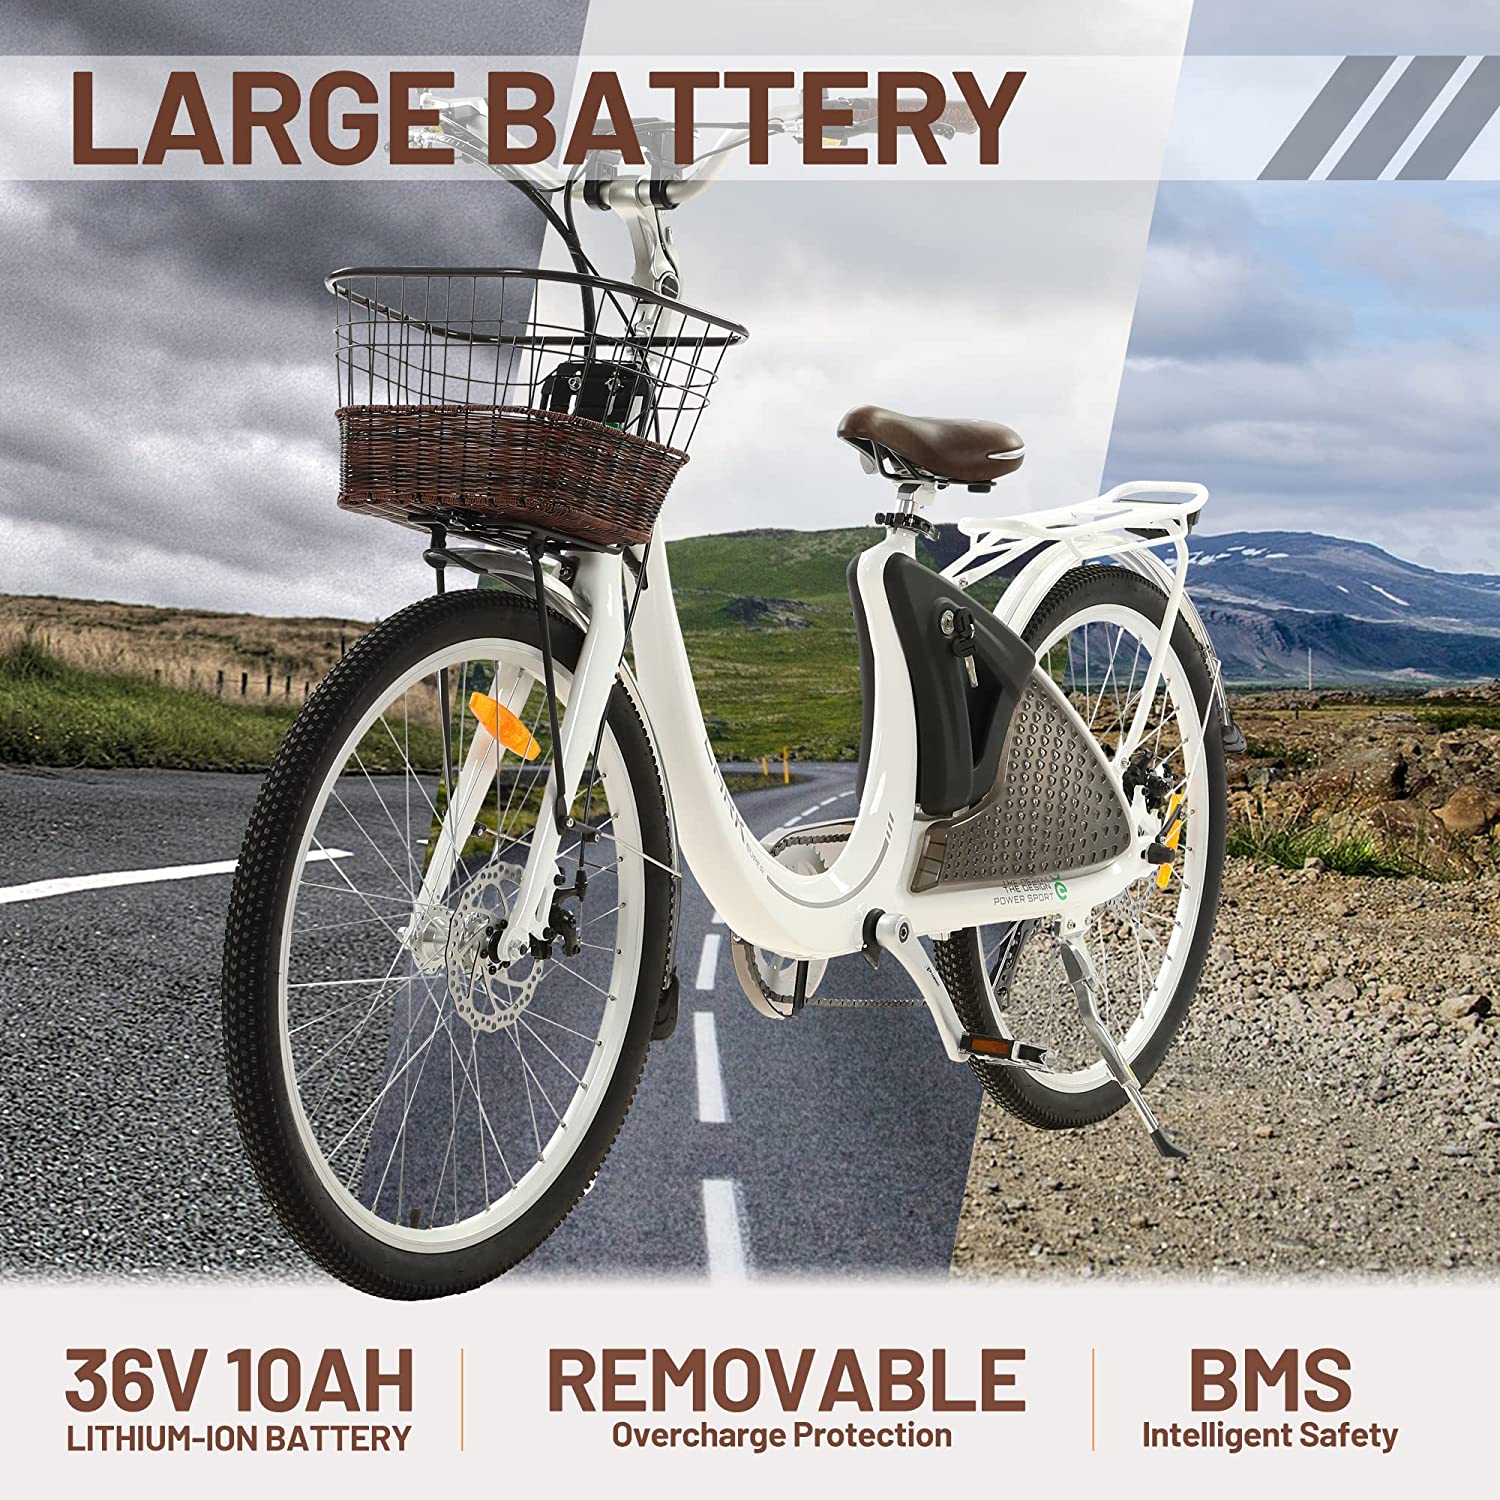 Ecotric, Ecotric Lark E-Bike 36V 10AH 500W 20 MPH City Bike For Women with Basket and Rear Rack White NS-LAK26LCD-W New